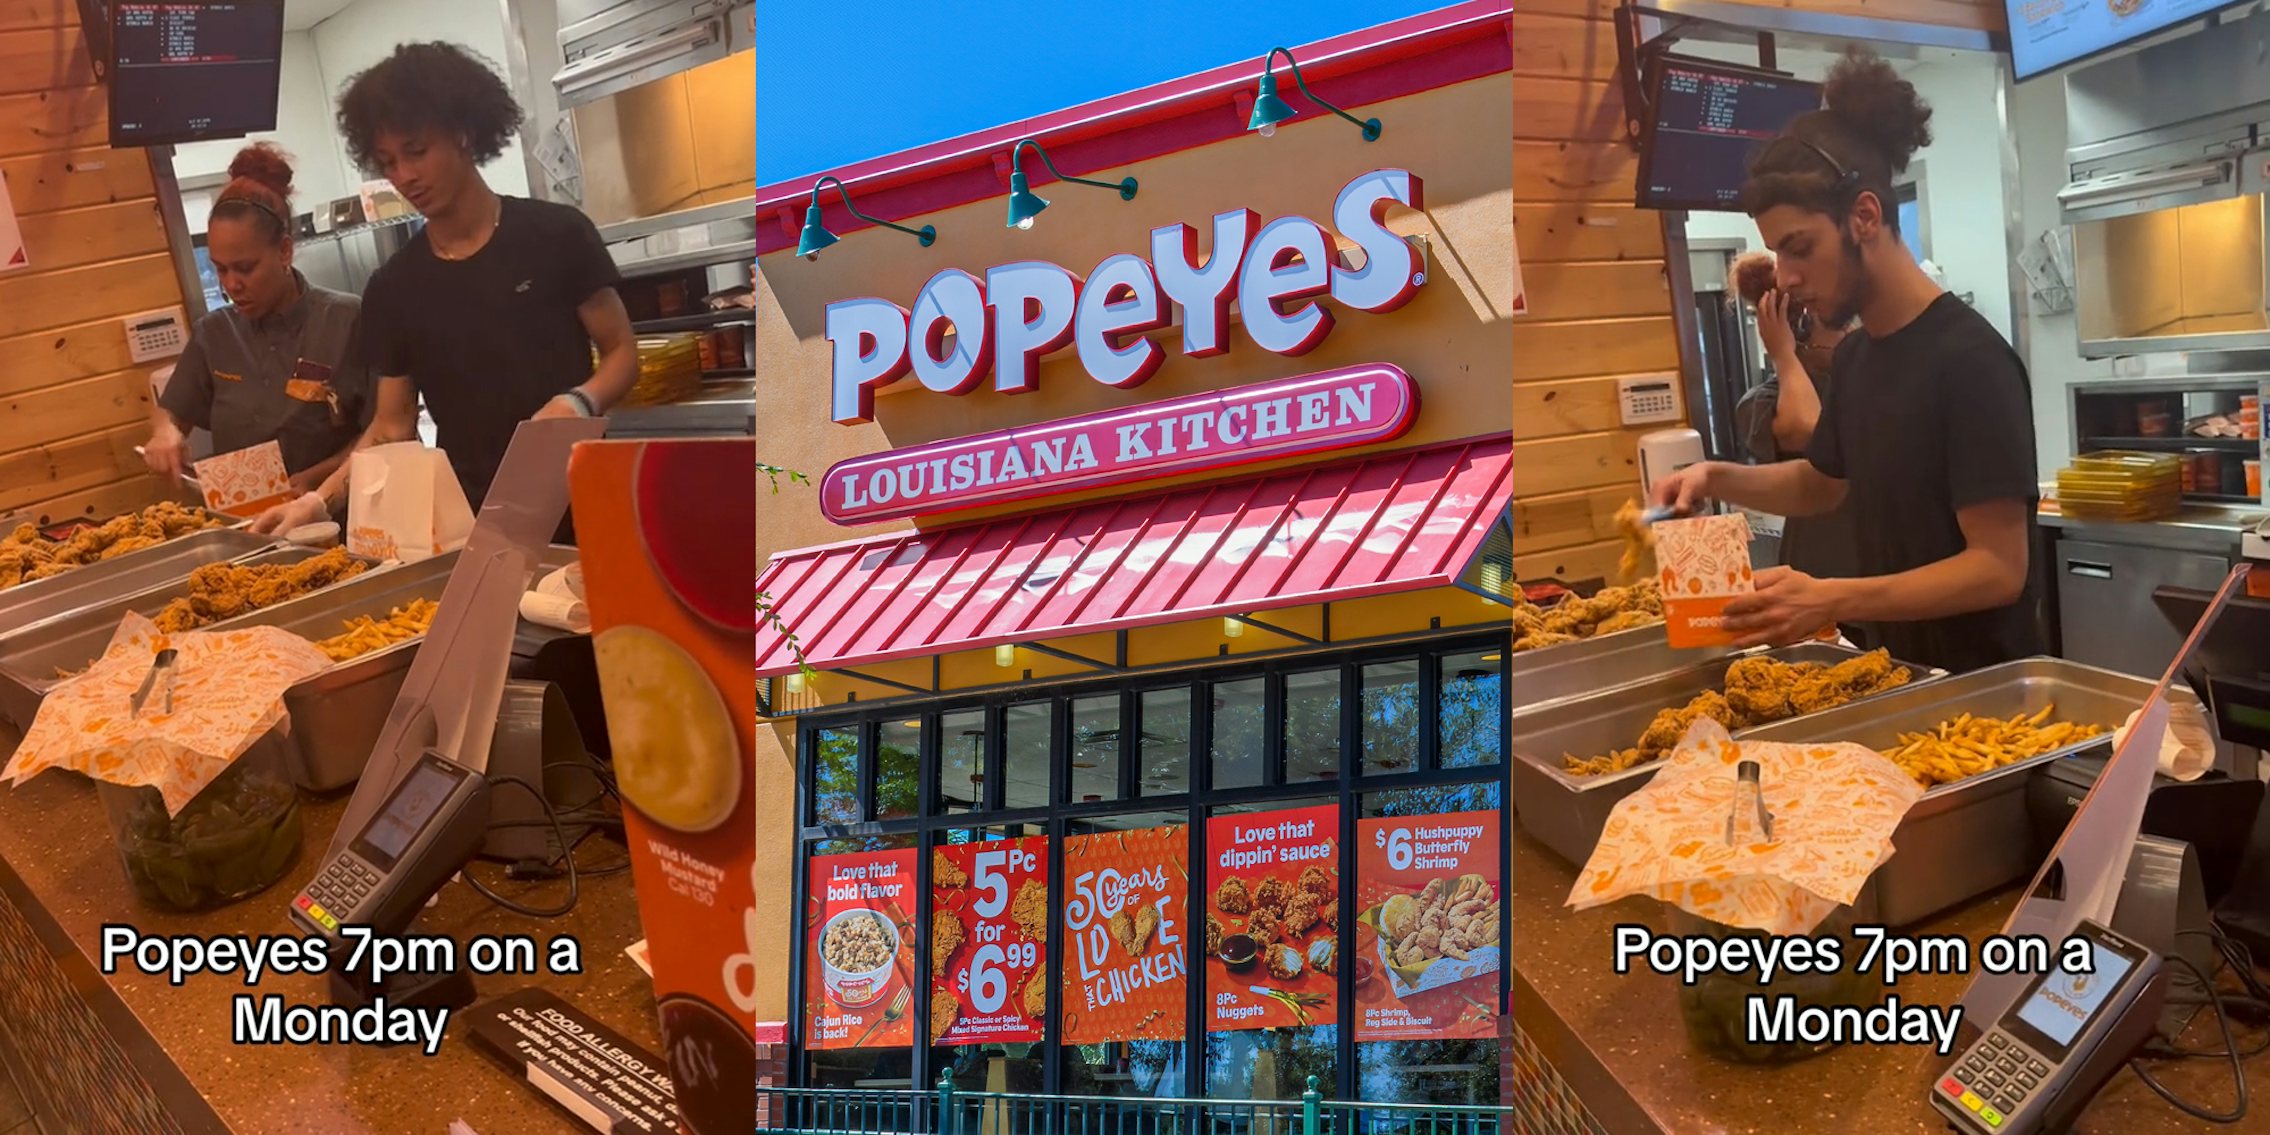 Popeye's workers getting food from counter to place in boxes with caption 'Popeyes 7pm on a Monday' (l) Popeyes building with sign (c) Popeye's workers getting food from counter to place in boxes with caption 'Popeyes 7pm on a Monday' (r)